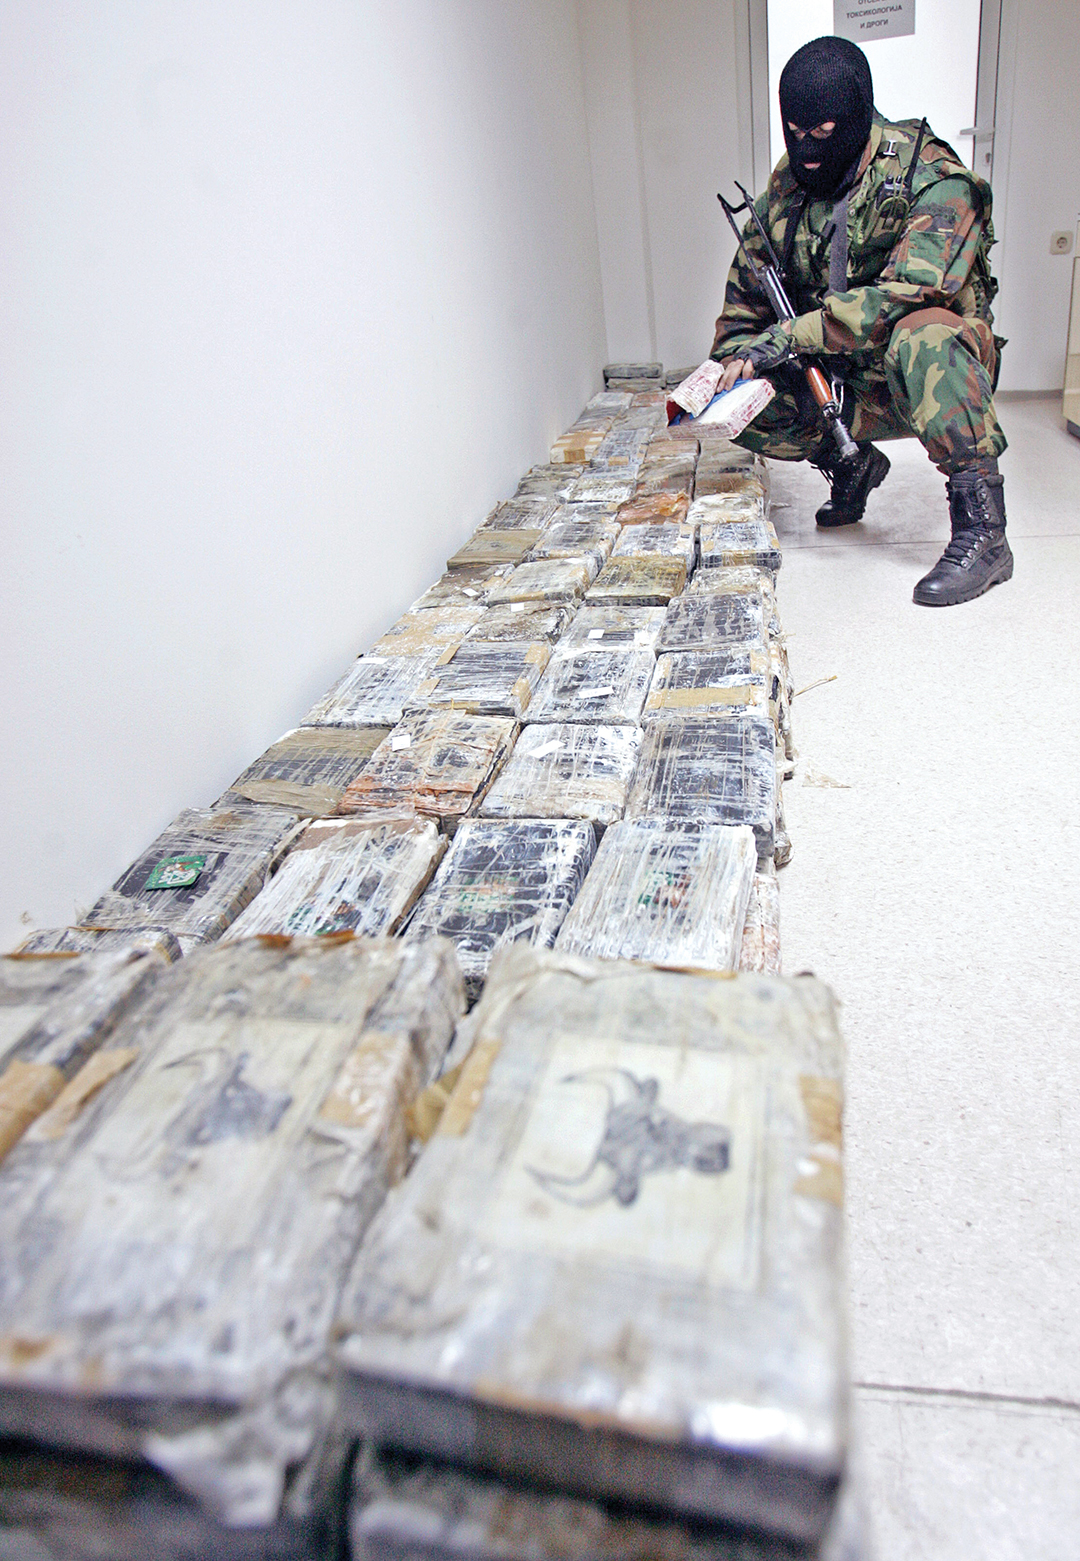 A Macedonian police officer examines cocaine seized from a truck at a border crossing with Kosovo. AFP/GETTY IMAGES